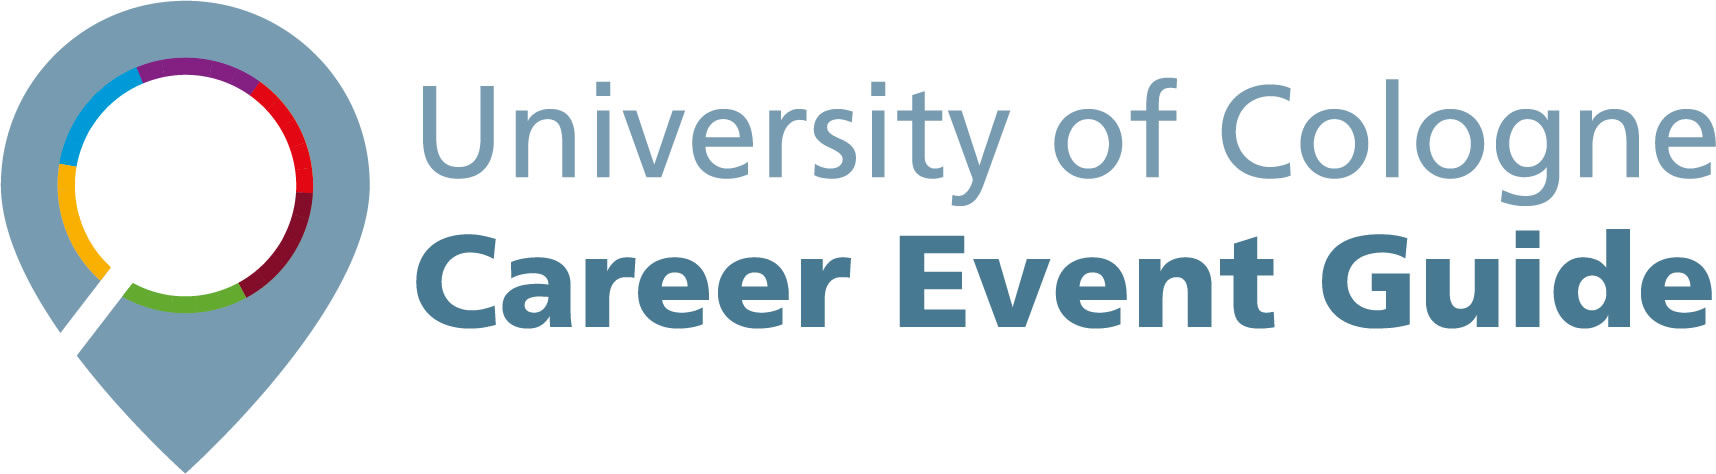 Career Event Guide